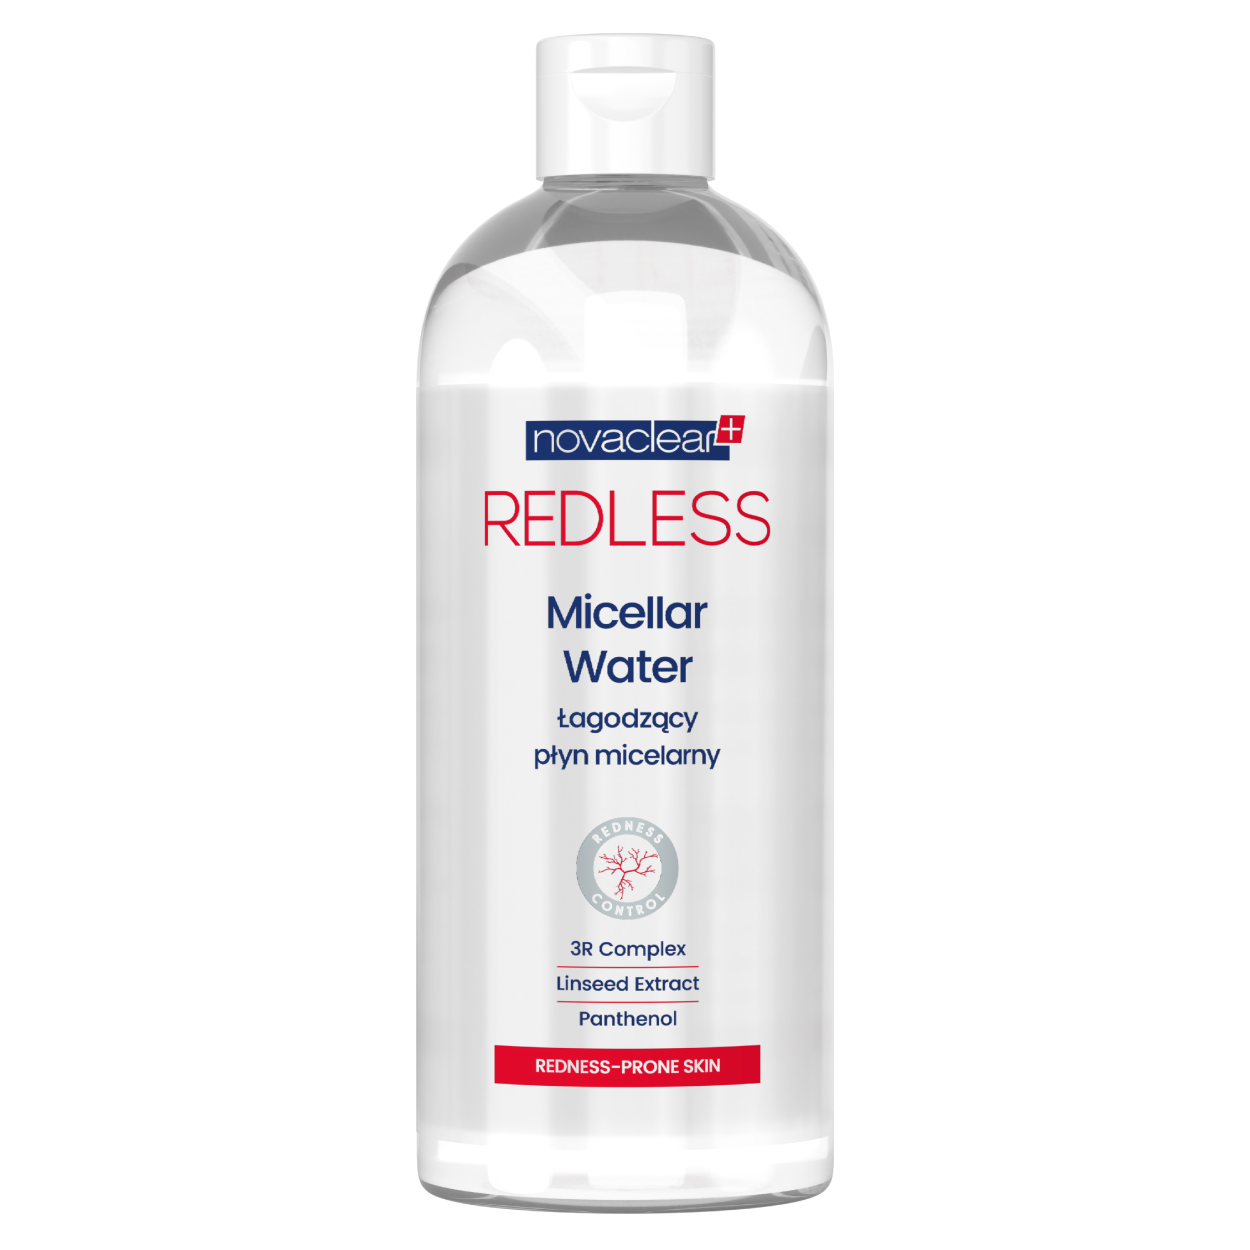 novaclear-redless-soothing-micellar-water